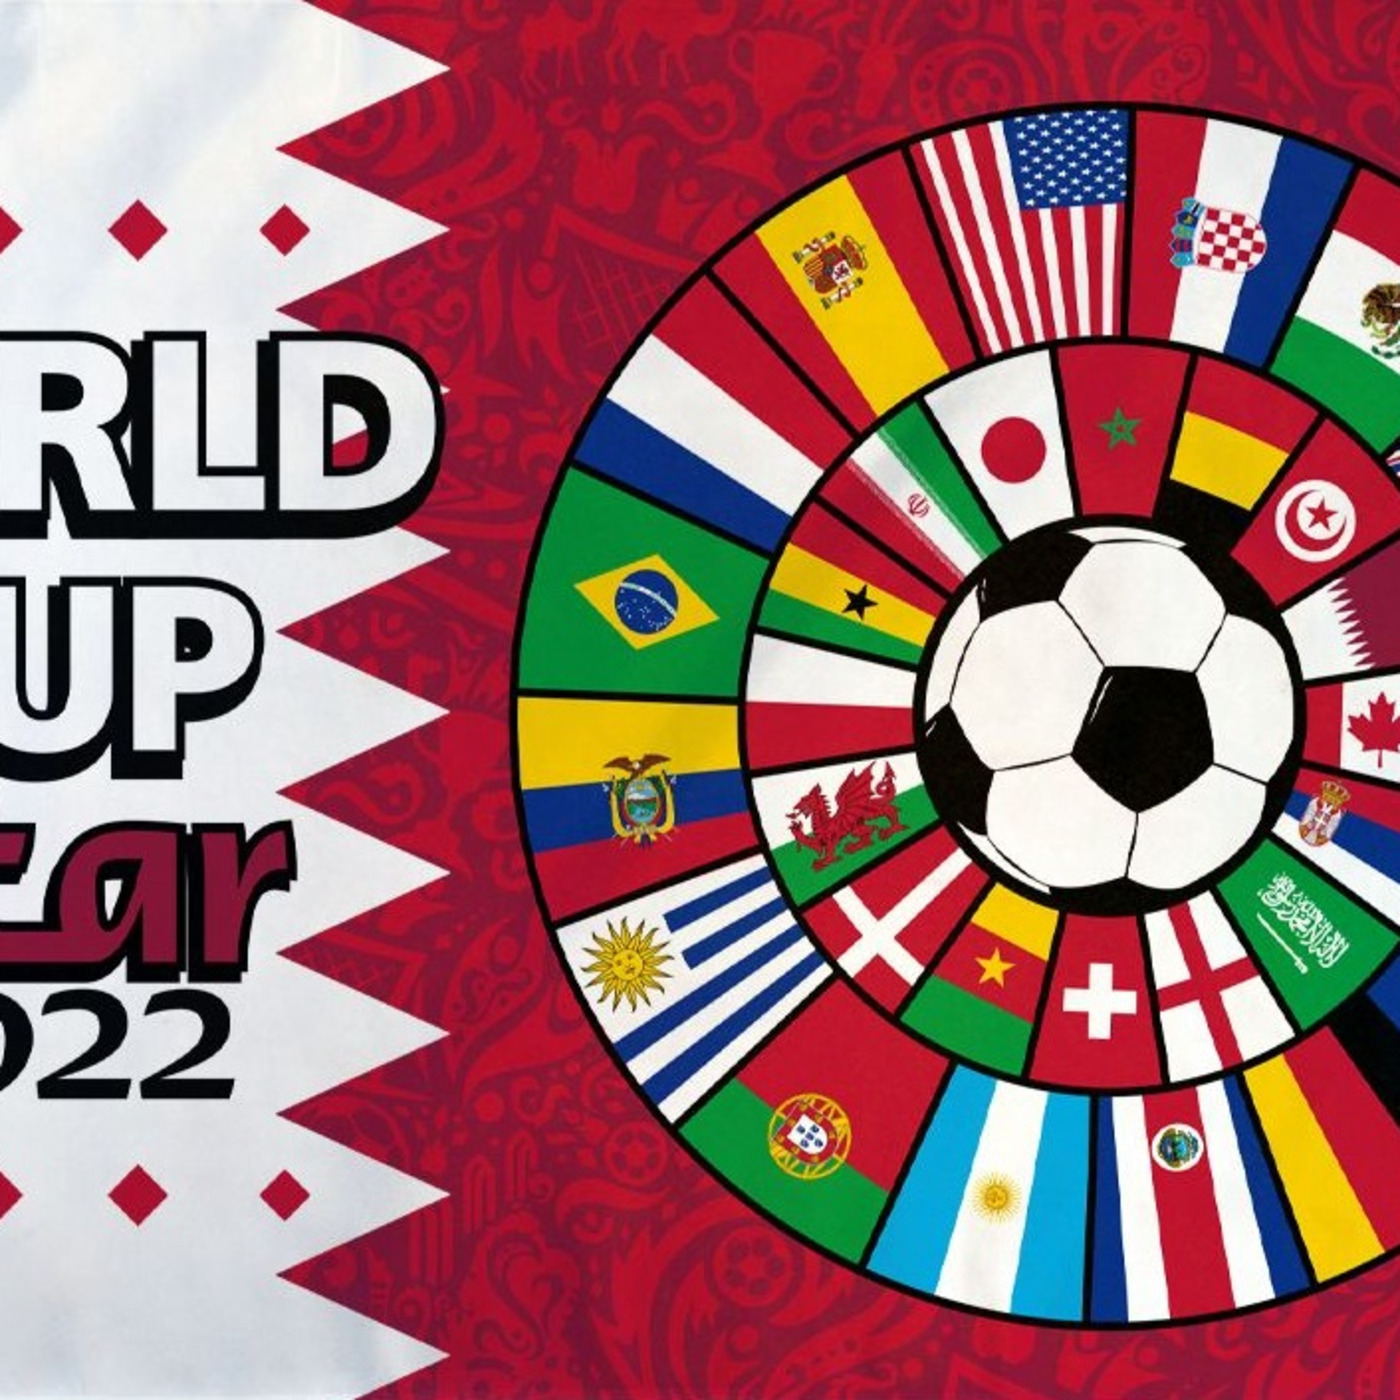 The Beautiful Game, A 2022 World Cup Podcast